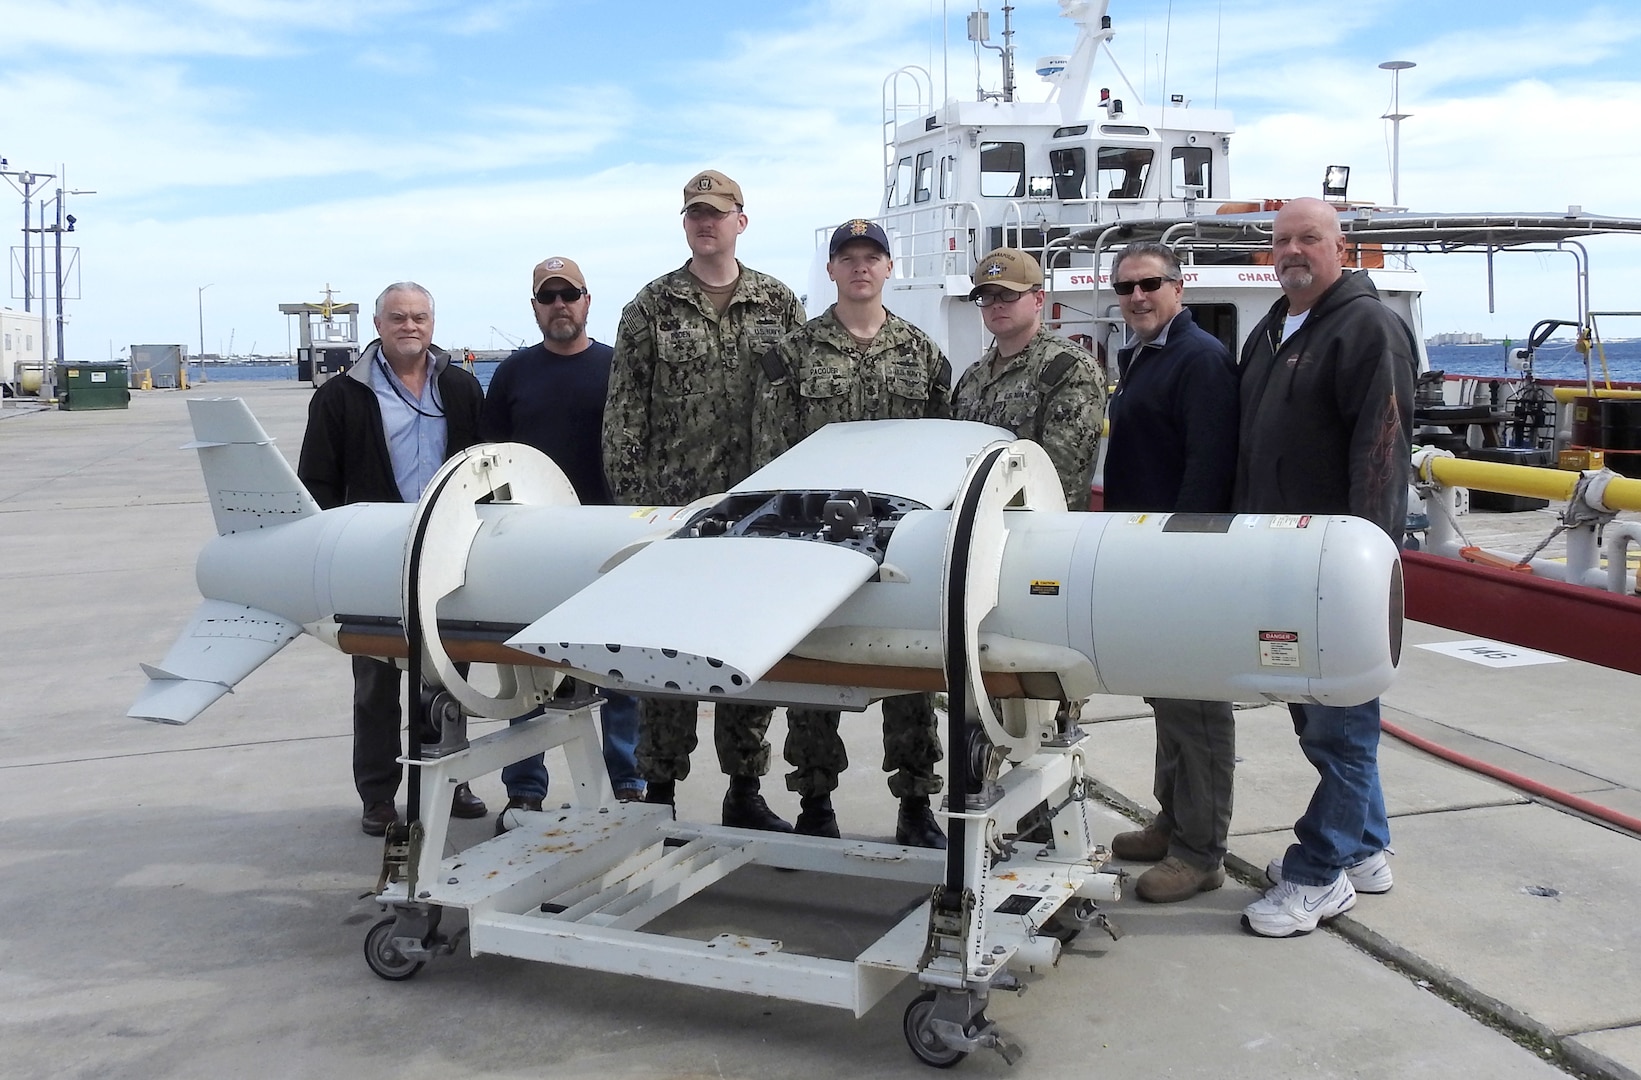 The AN/AQS-20C (Q-20C) Sonar Sensor Post Mission Analysis (PMA) Operators gather pier side March 15, 2019 with the Naval Surface Warfare Center Panama City Division (NSWC PCD) Q-20C project team’s subject matter experts.